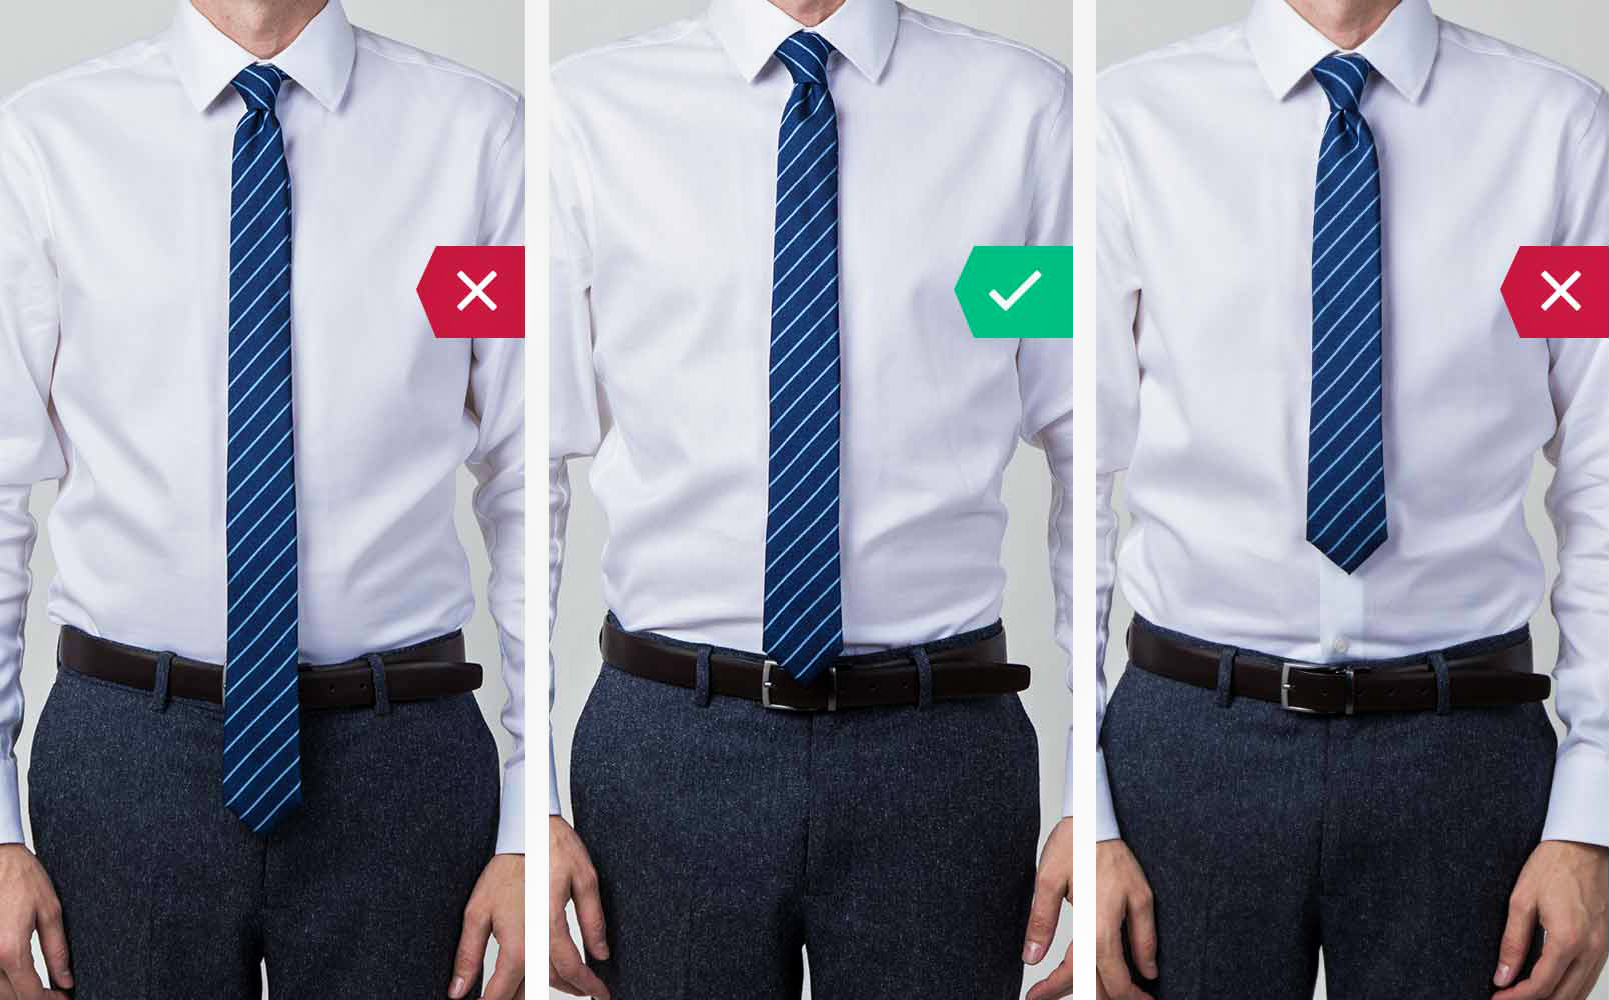 How to fit your tie's length: Wrong tie length vs. correct tie length